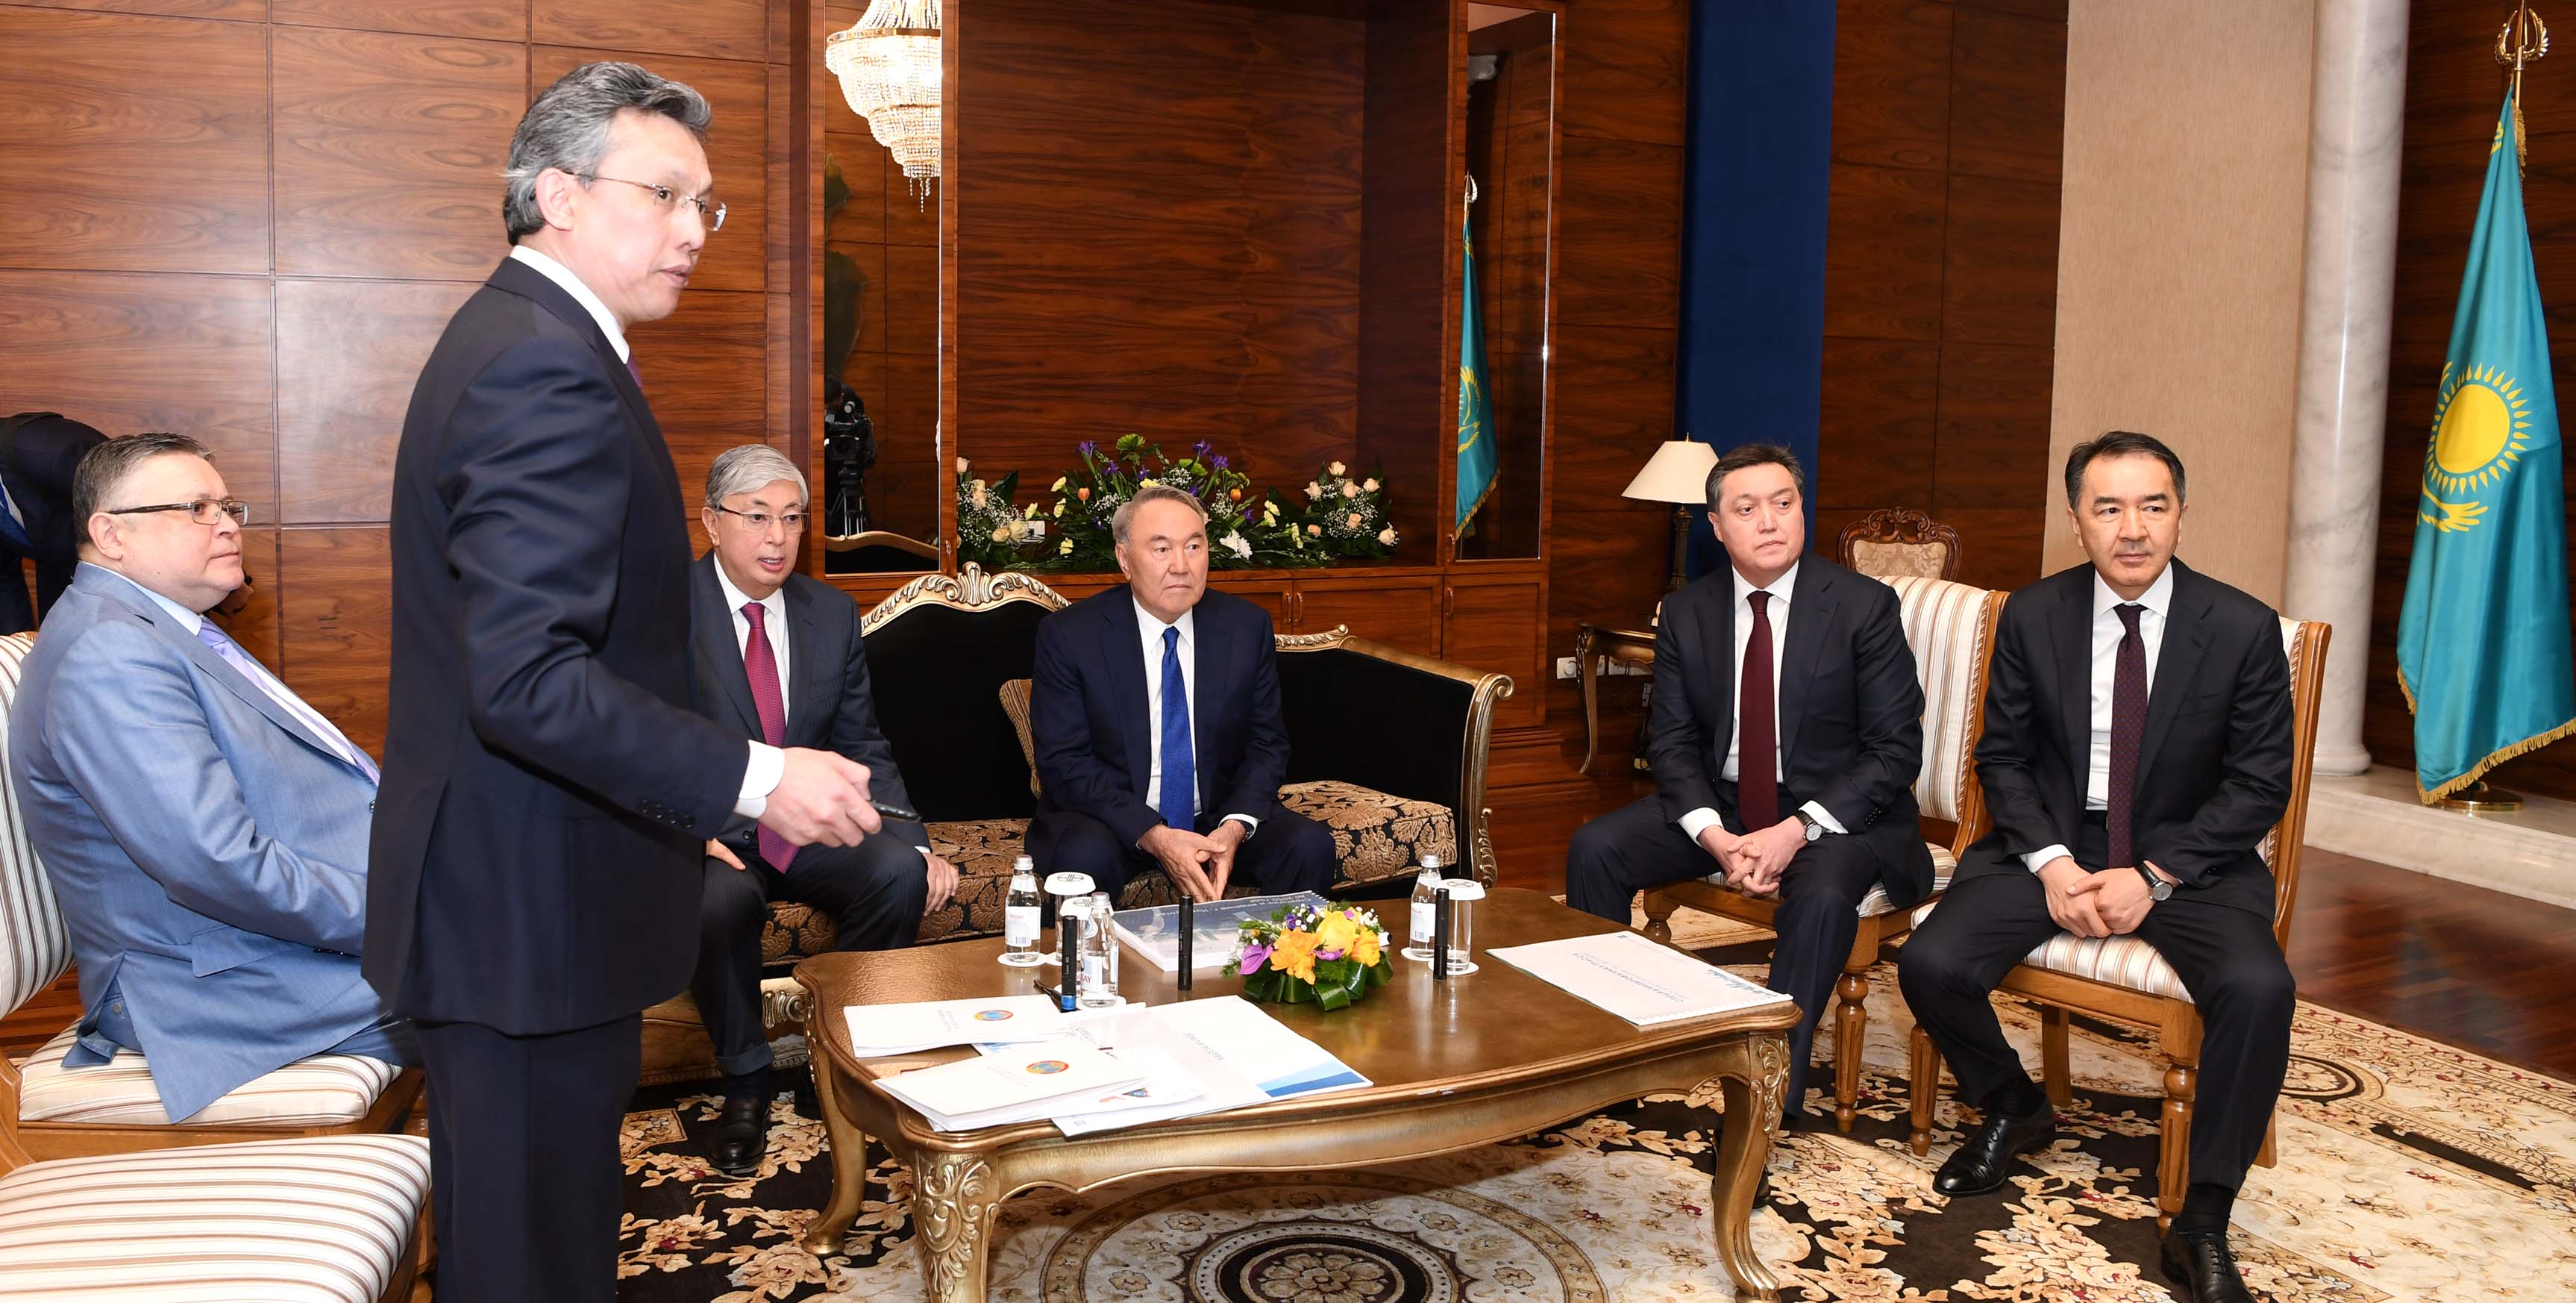 N.Nazarbayev got acquainted with the future development plans of the capital